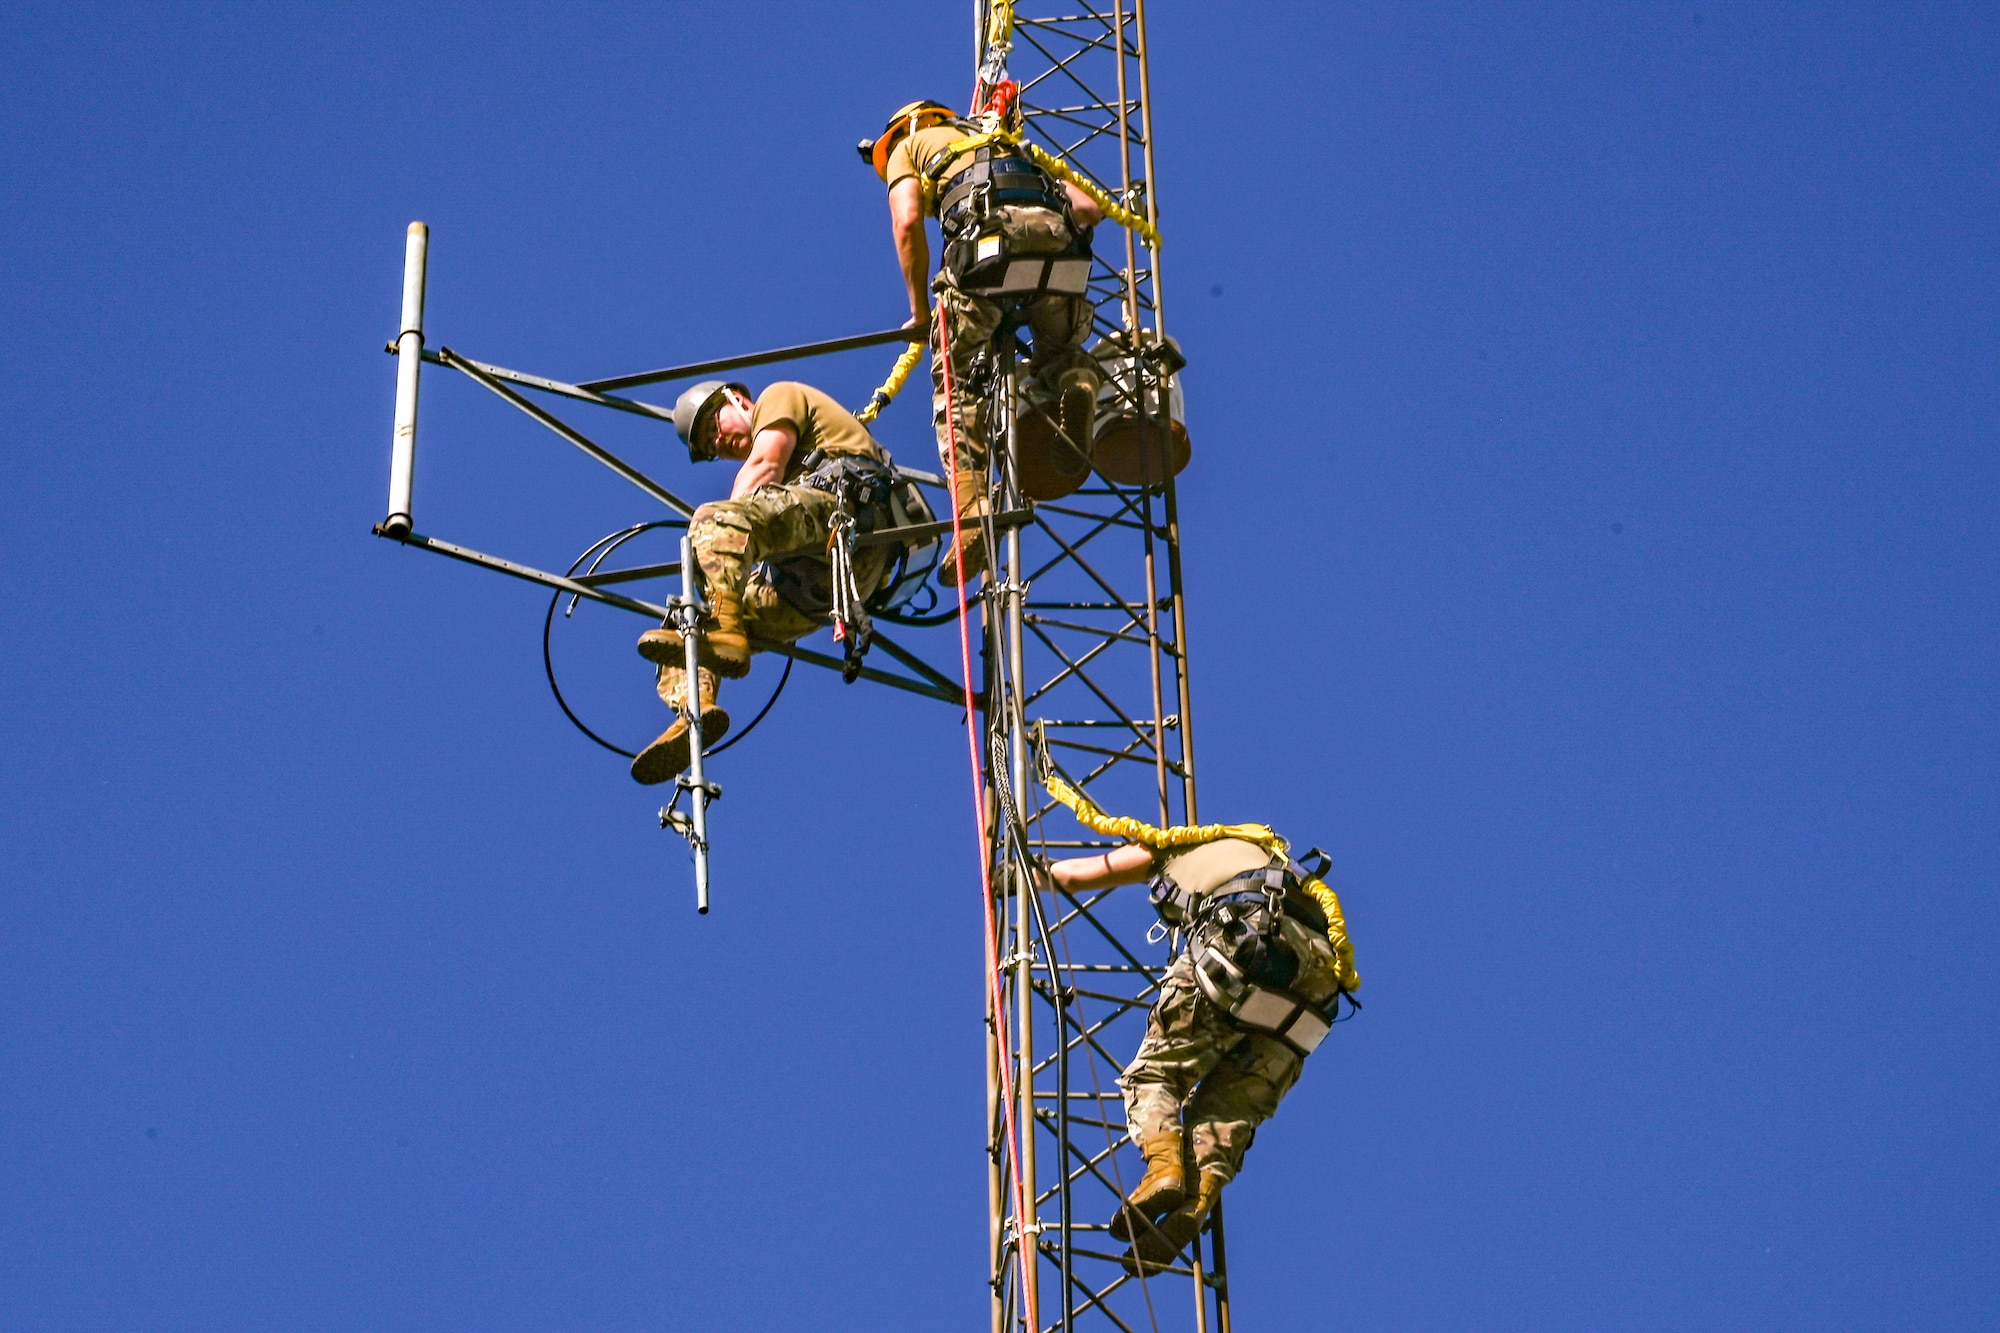 People wearing hard hats and harnesses prepare to climb a structure.